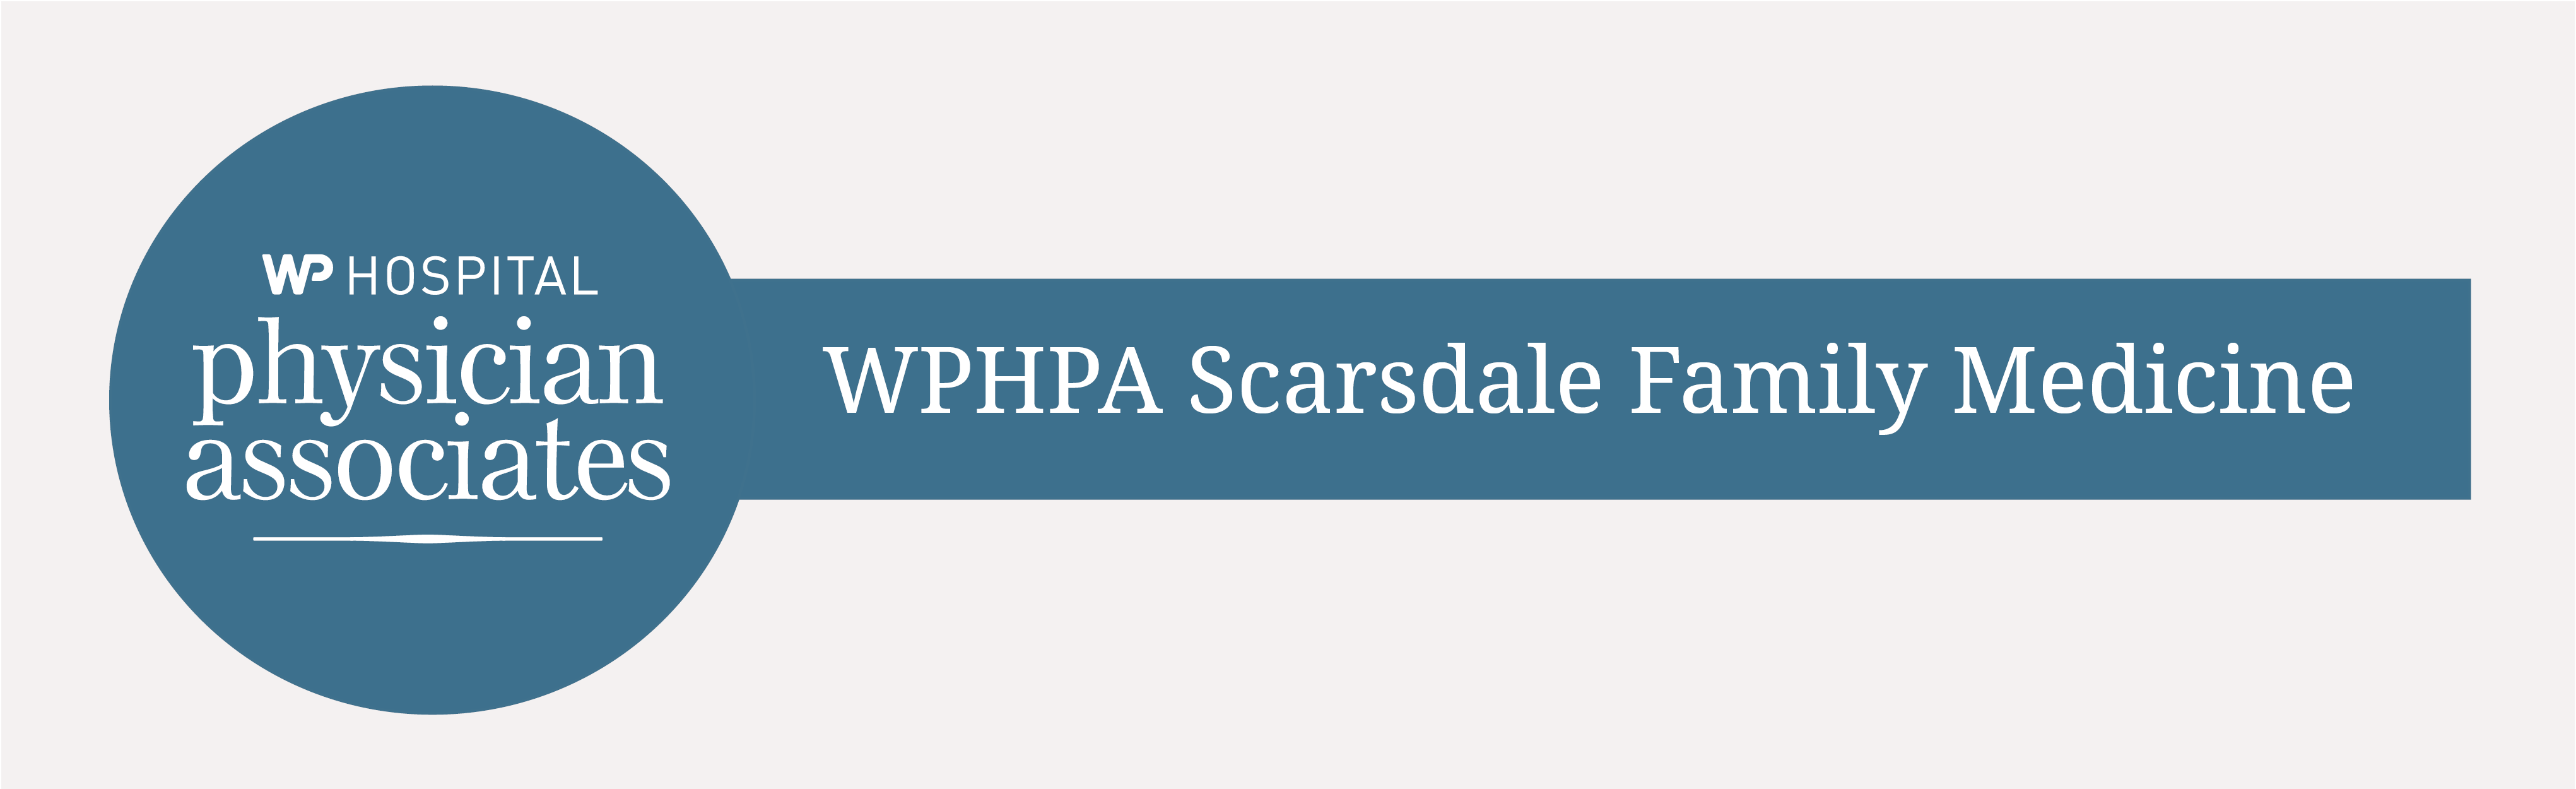 Family Medicine Practitioners Drs. Ira and Marilyn Sutton Join WPHPA Scarsdale Family Medicine